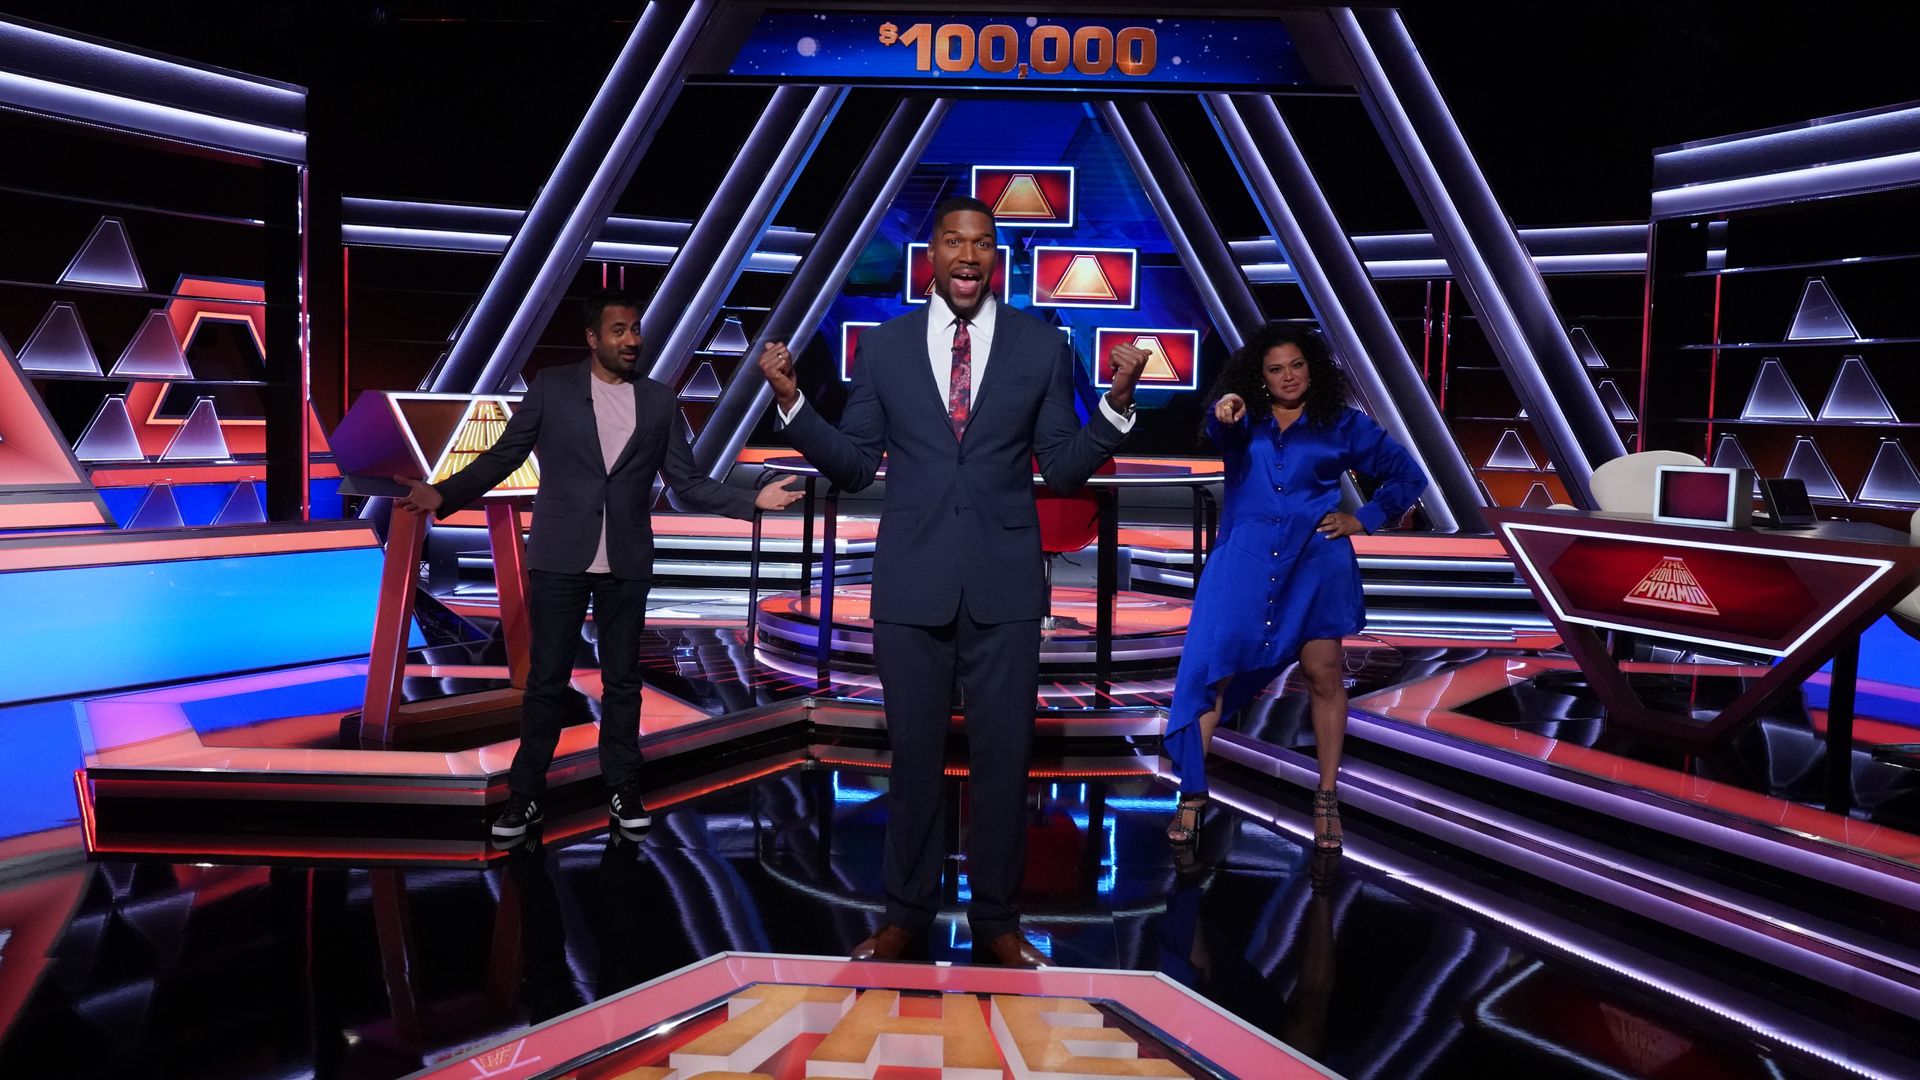 The $100,000 Pyramid background